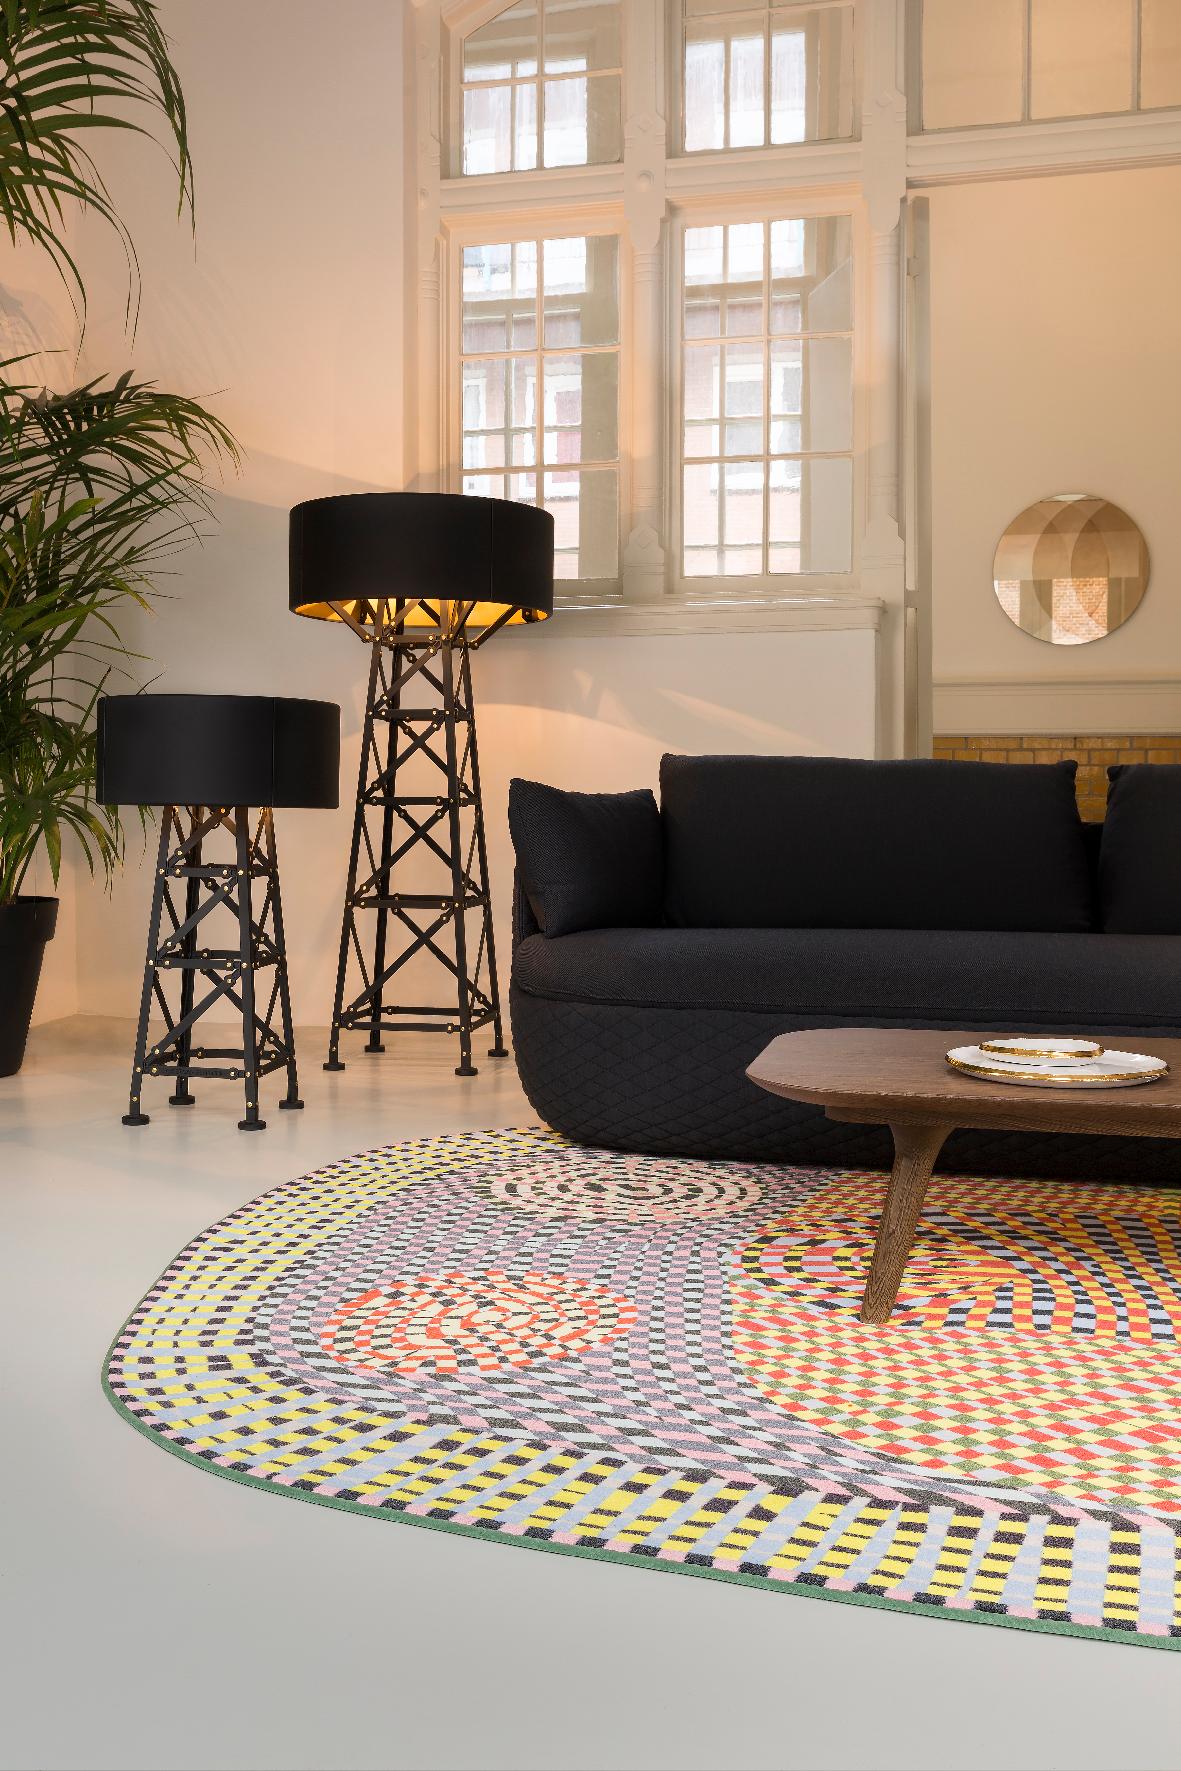 Moooi Magic Marker Wild rug in Wool by Bertjan Pot

Bertjan Pot is a designer, probably best known for his Random Light (1999).The light started as a material experiment, which is basically the start of each product created by Studio Bertjan